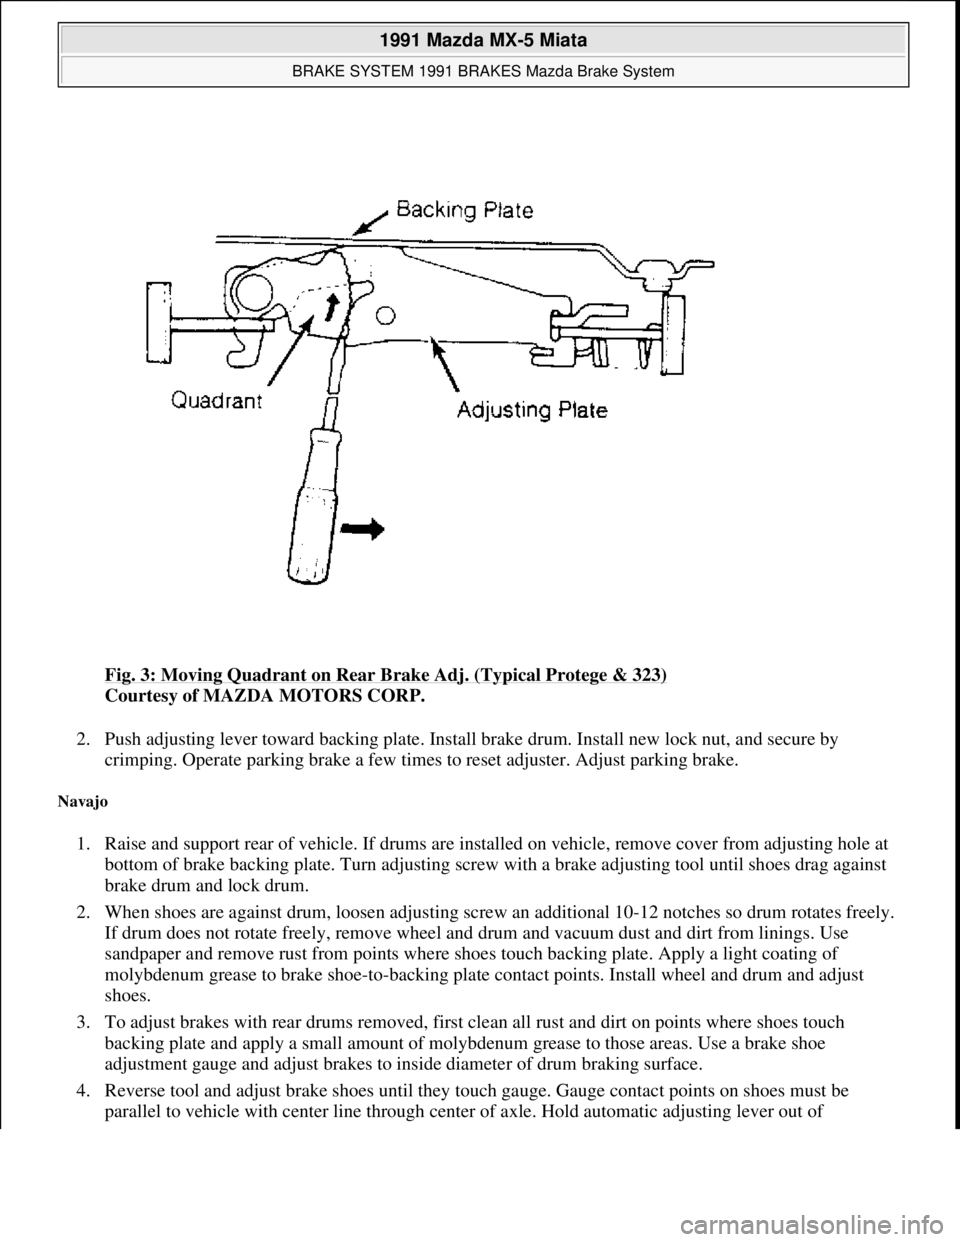 MAZDA MIATA 1991  Factory Service Manual Fig. 3: Moving Quadrant on Rear Brake Adj. (Typical Protege & 323) 
Courtesy of MAZDA MOTORS CORP. 
2. Push adjusting lever toward backing plate. Install brake drum. Install new lock nut, and secure b